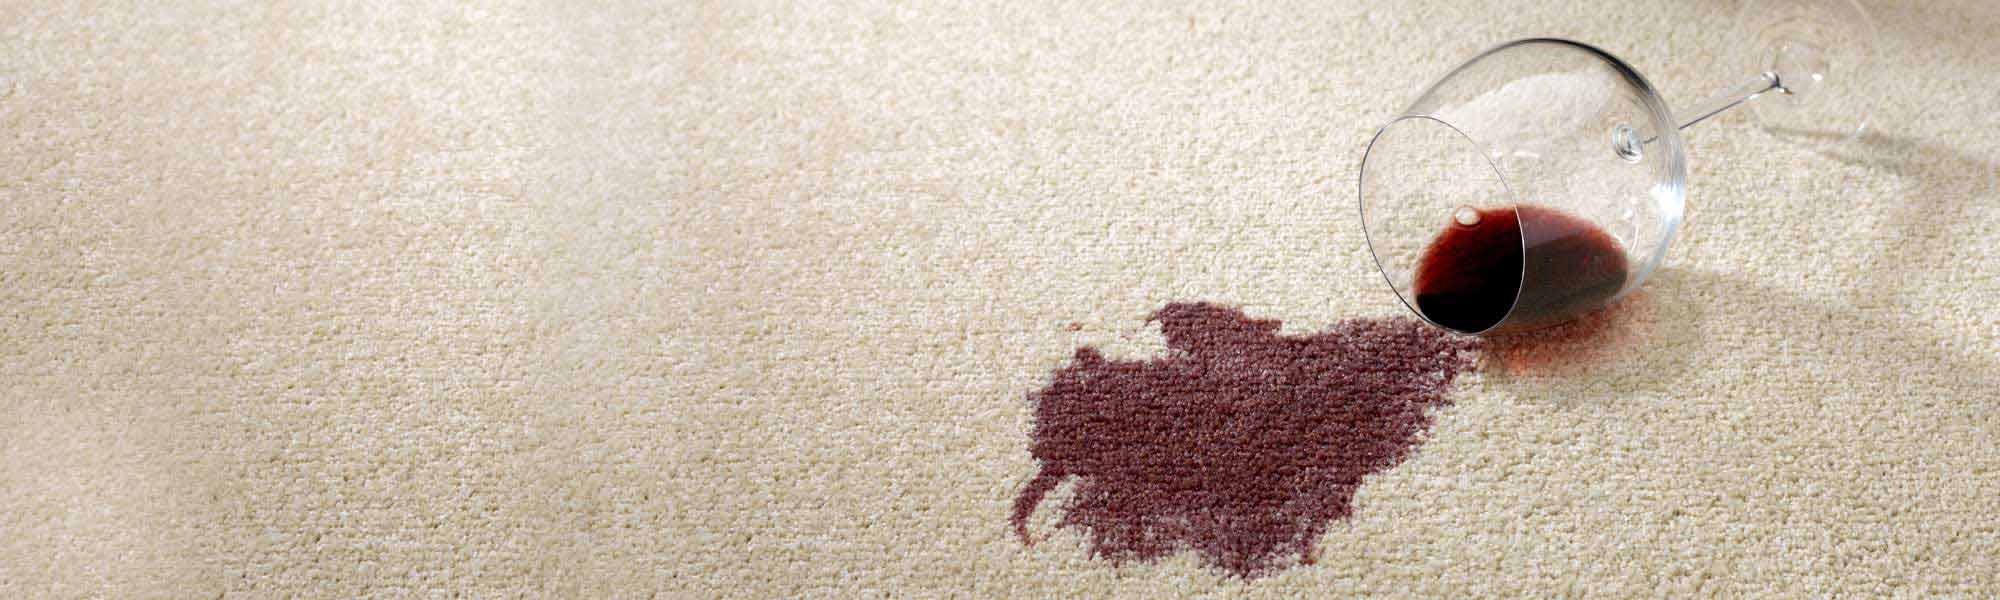 Professional Stain Removal Service by Chem-Dry of Marys